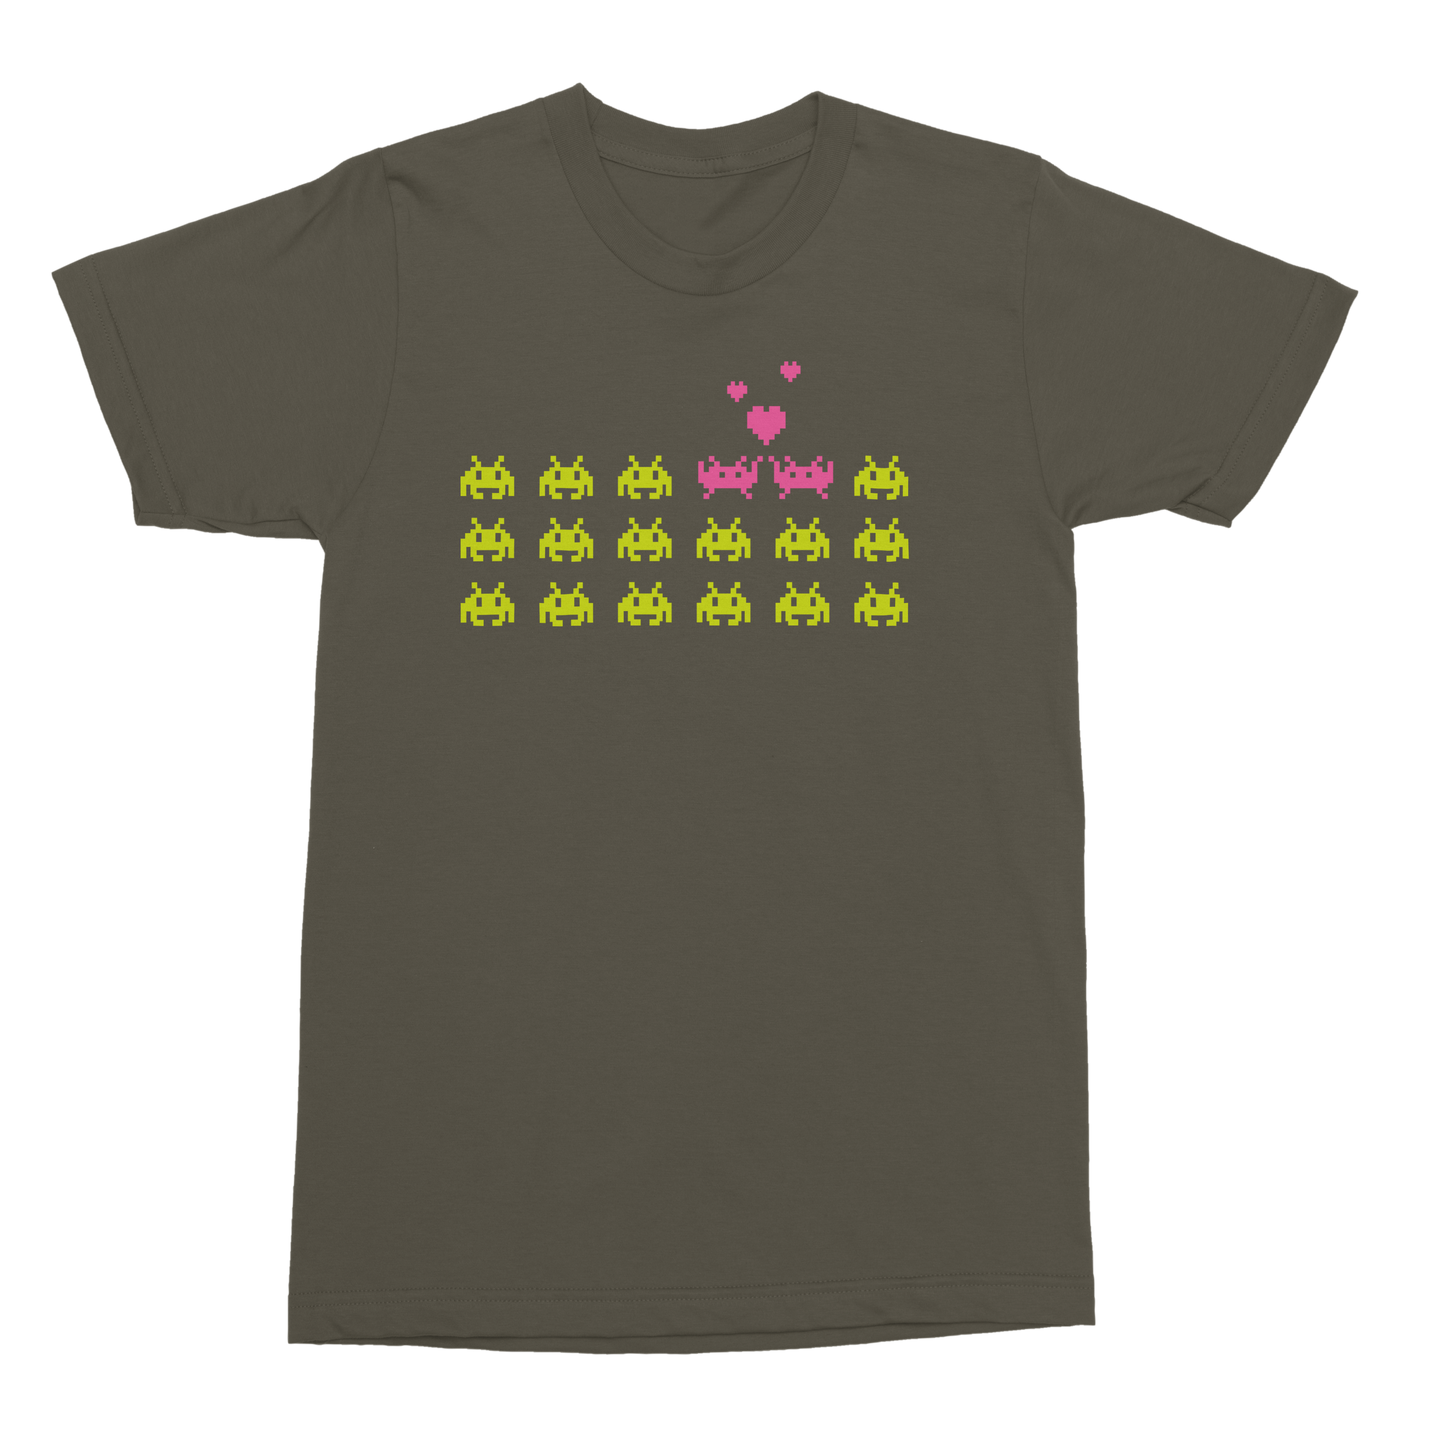 Space Invaders T-shirt